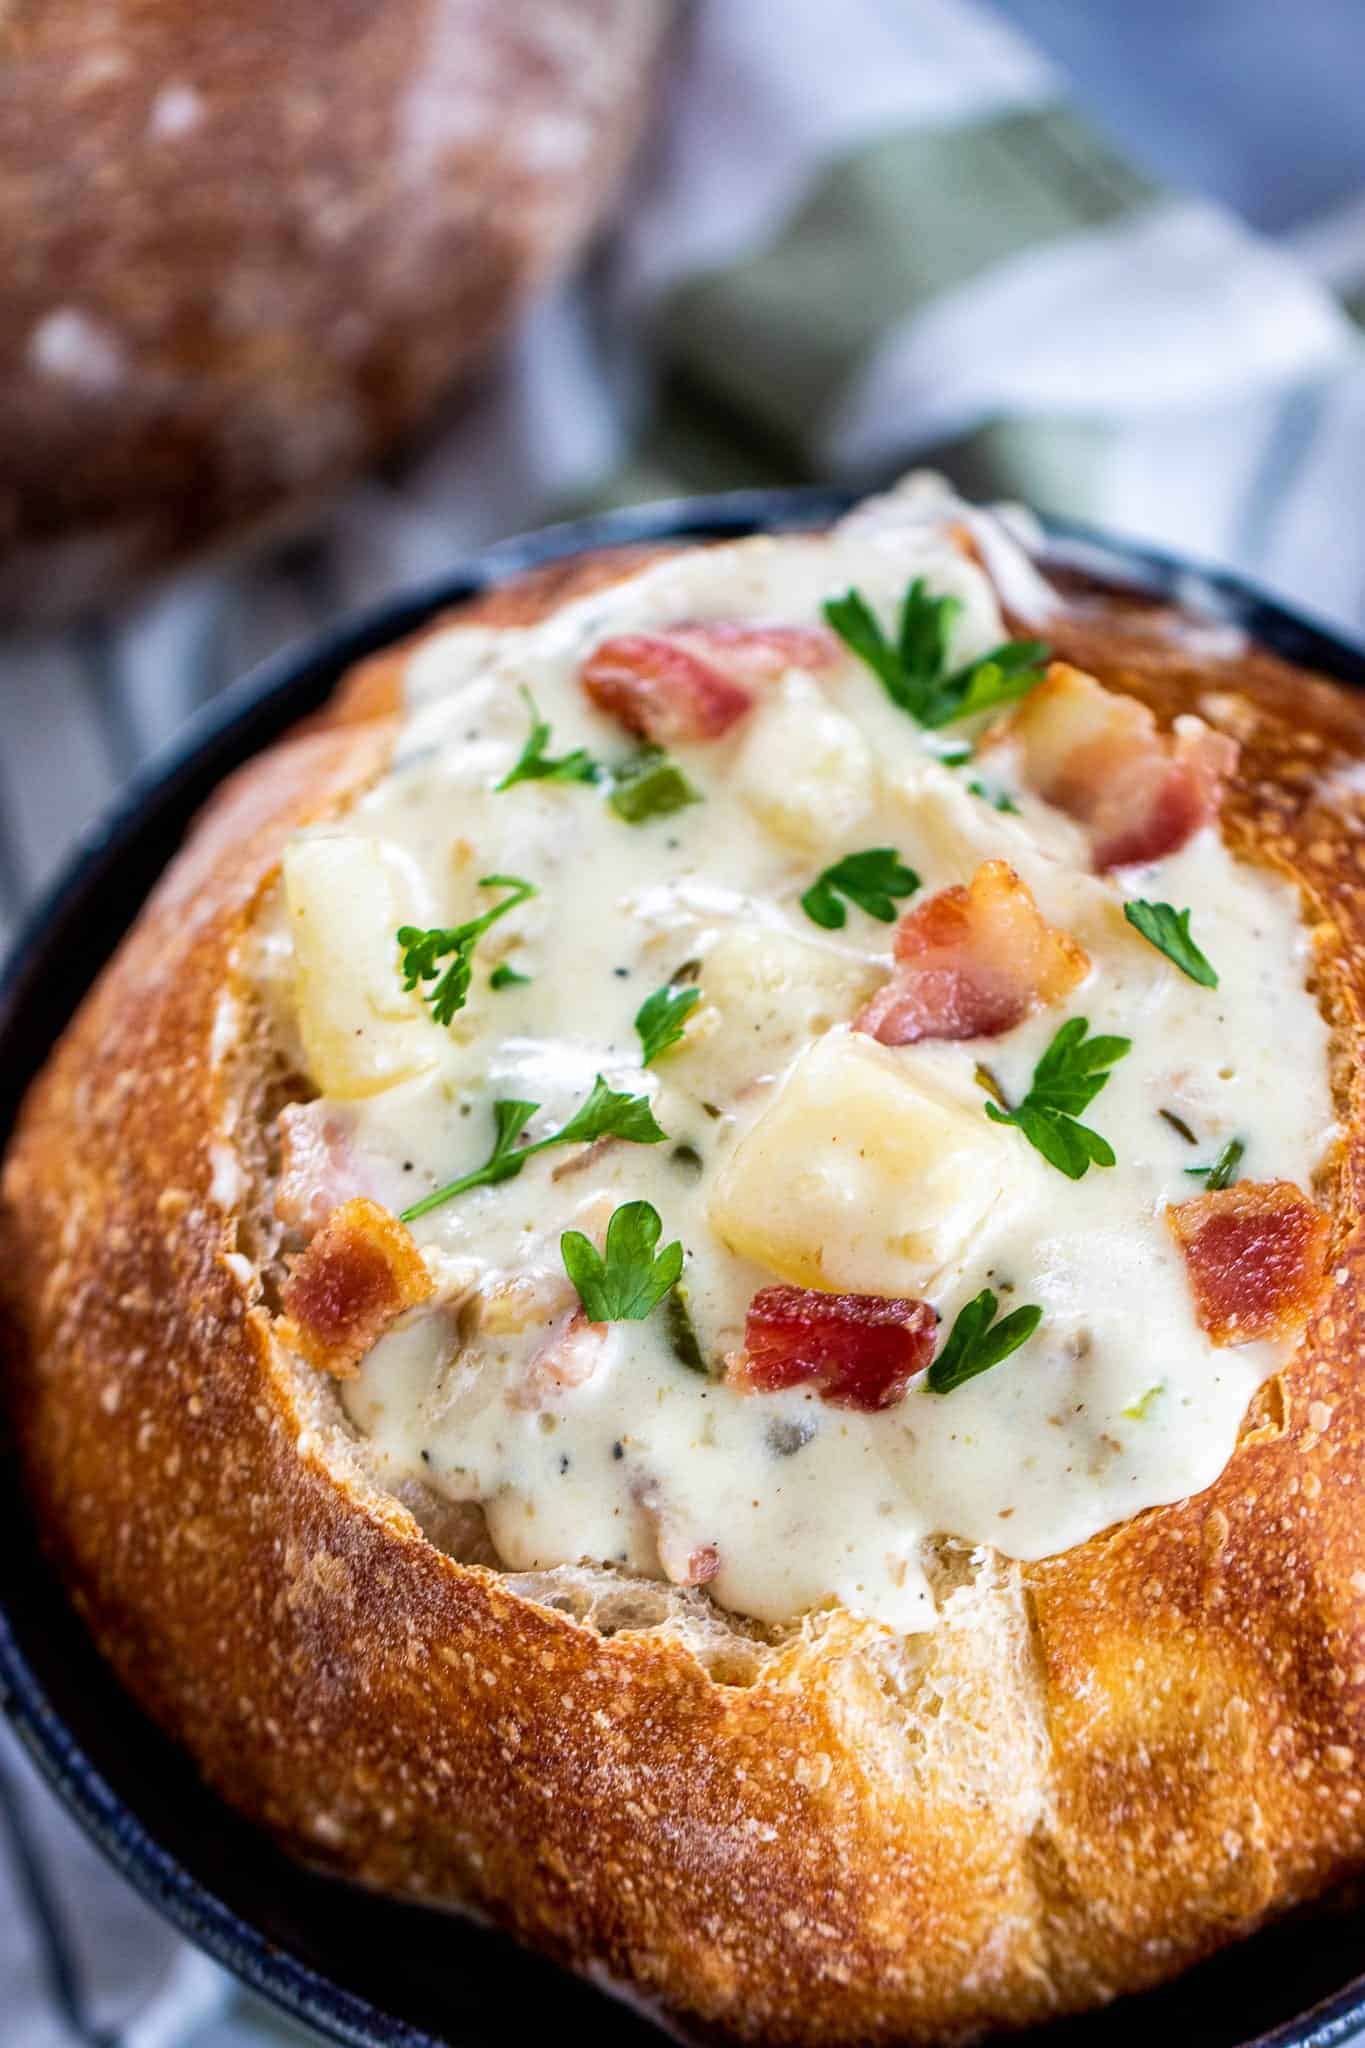 Instant Pot clam chowder in a bread bowl